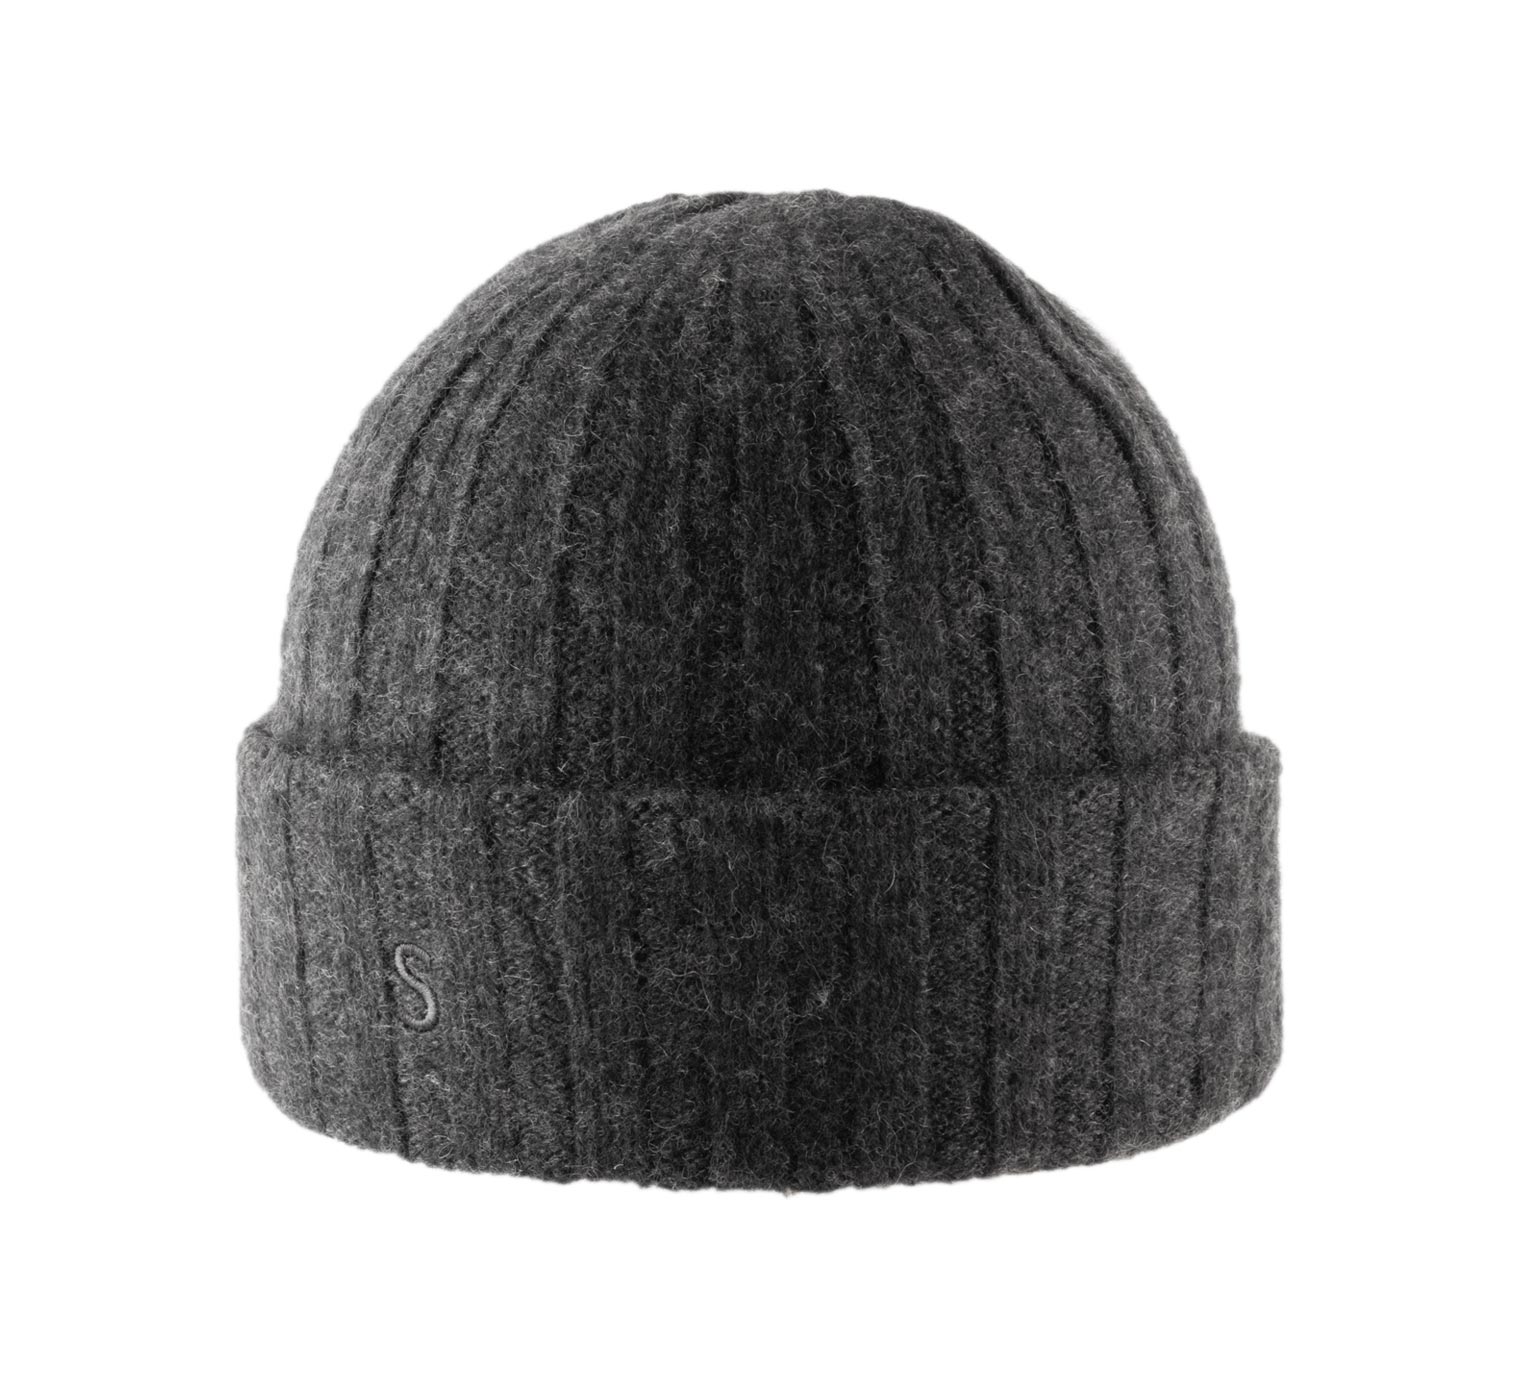 Surth Cashmere, Beanies Stetson 100% Cashmere Very